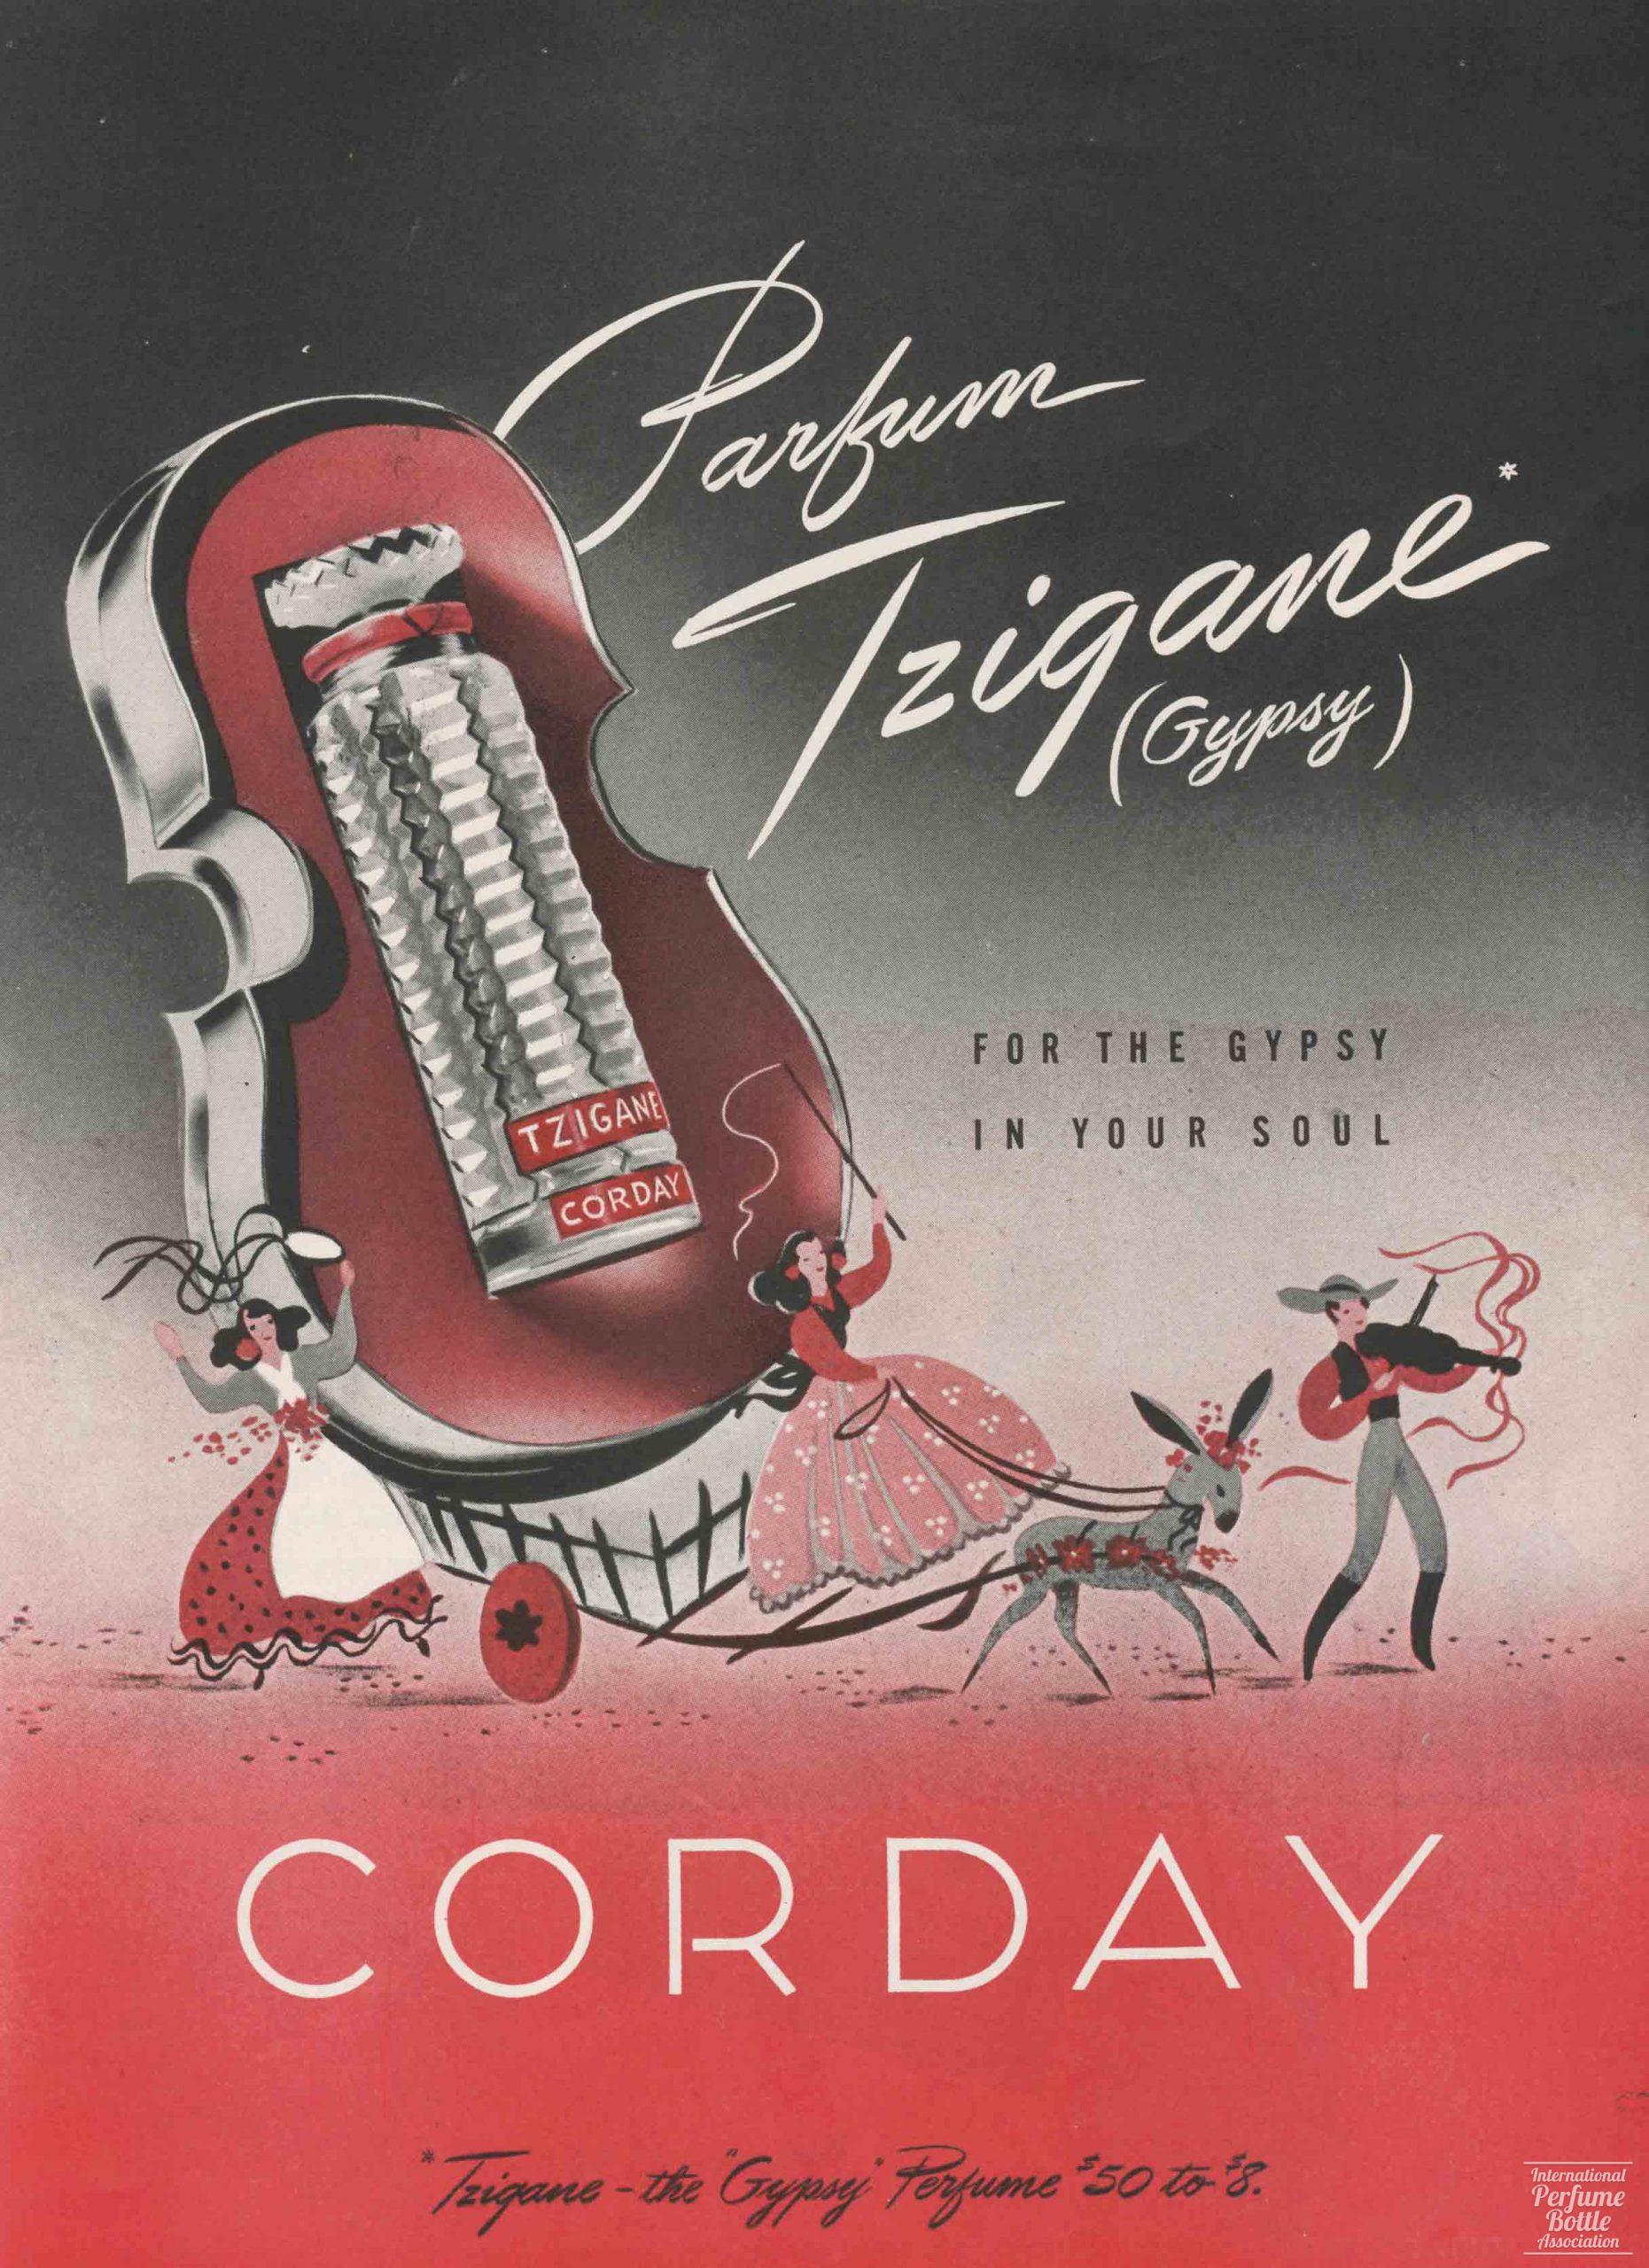 "Tzigane" by Corday Advertisement - 1945